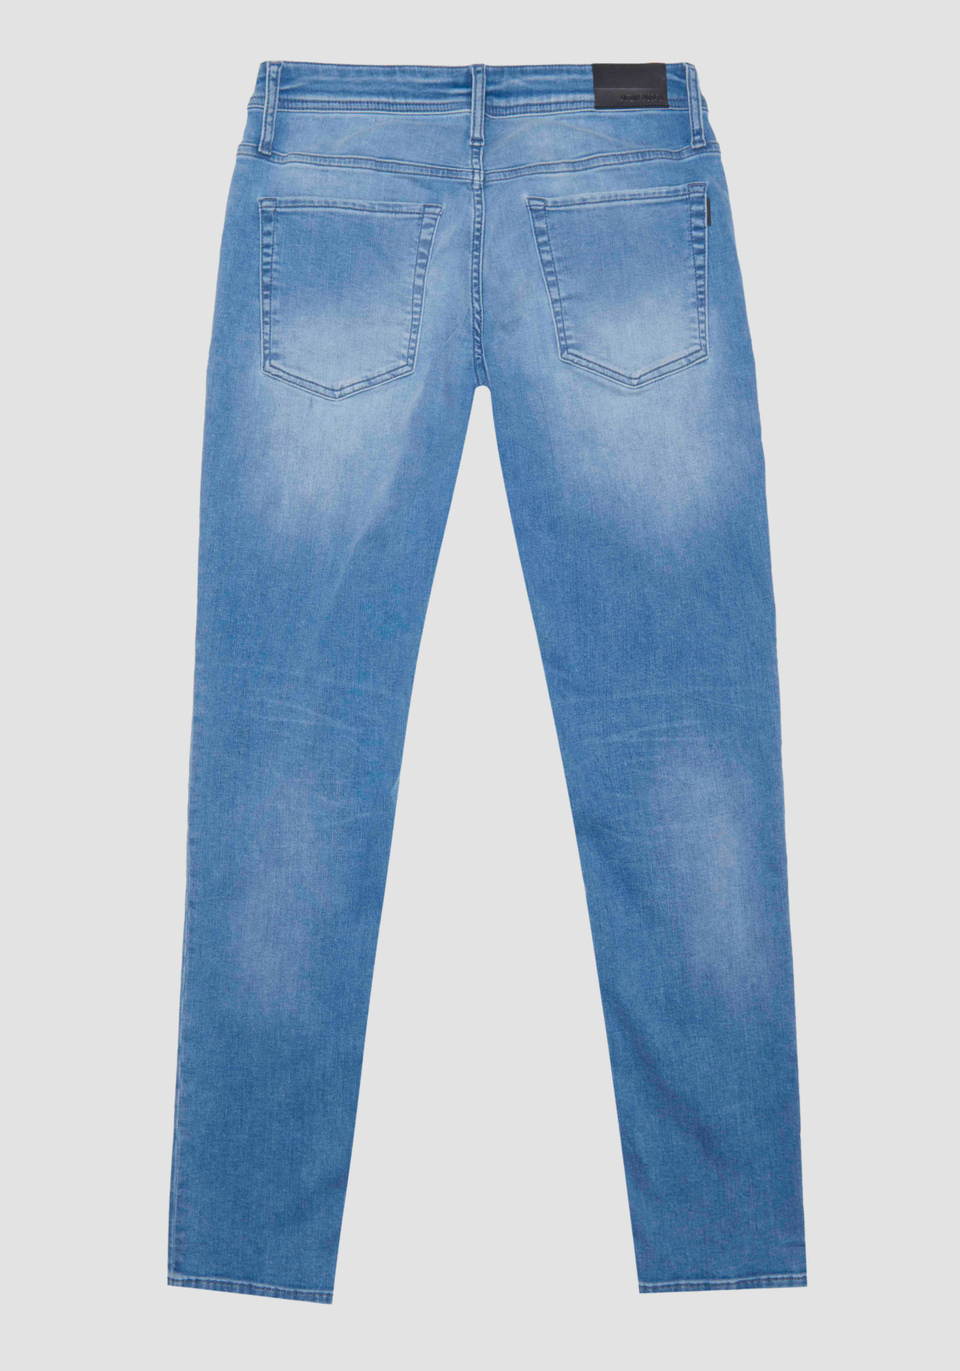 JEANS "OZZY" TAPERED FIT IN MID BLUE POWER STRETCH DENIM - Antony Morato Online Shop